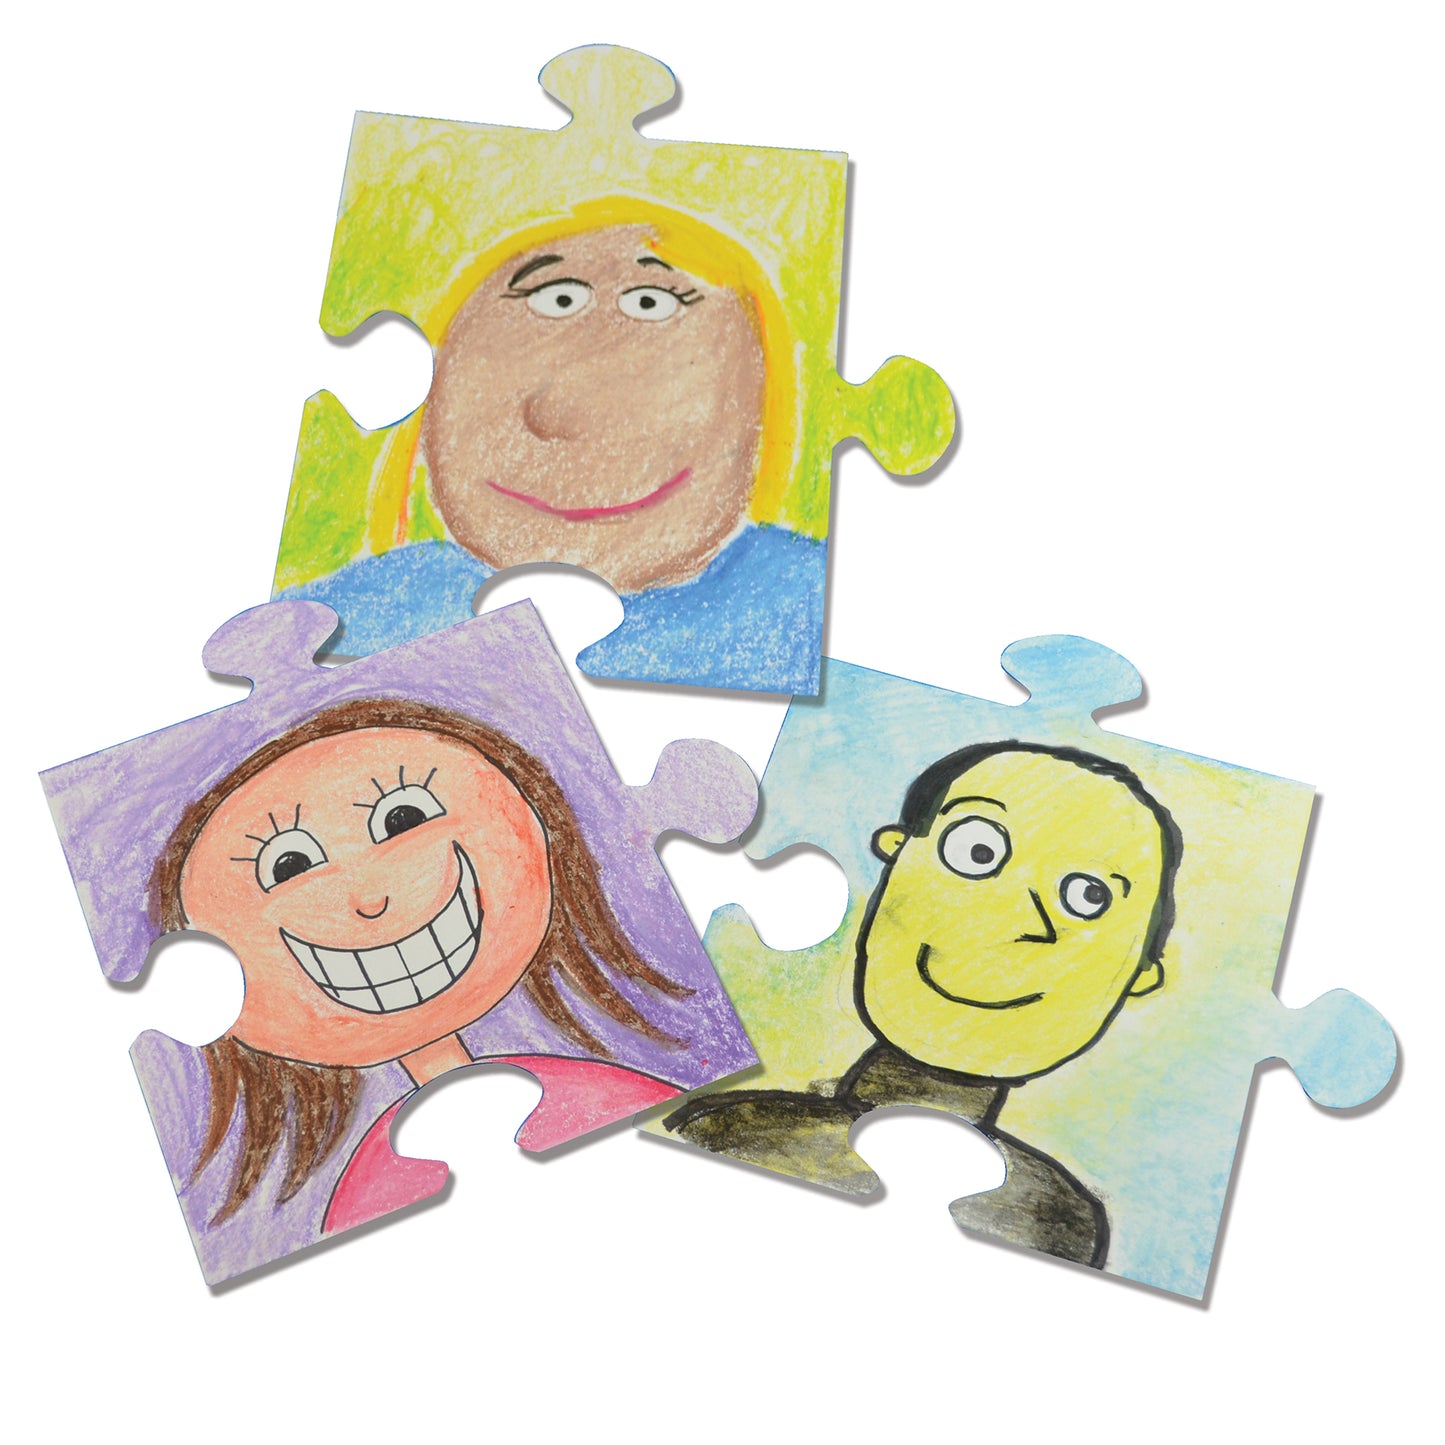 We All Fit Together Giant Puzzle Pieces, 30 Per Pack, 2 Packs